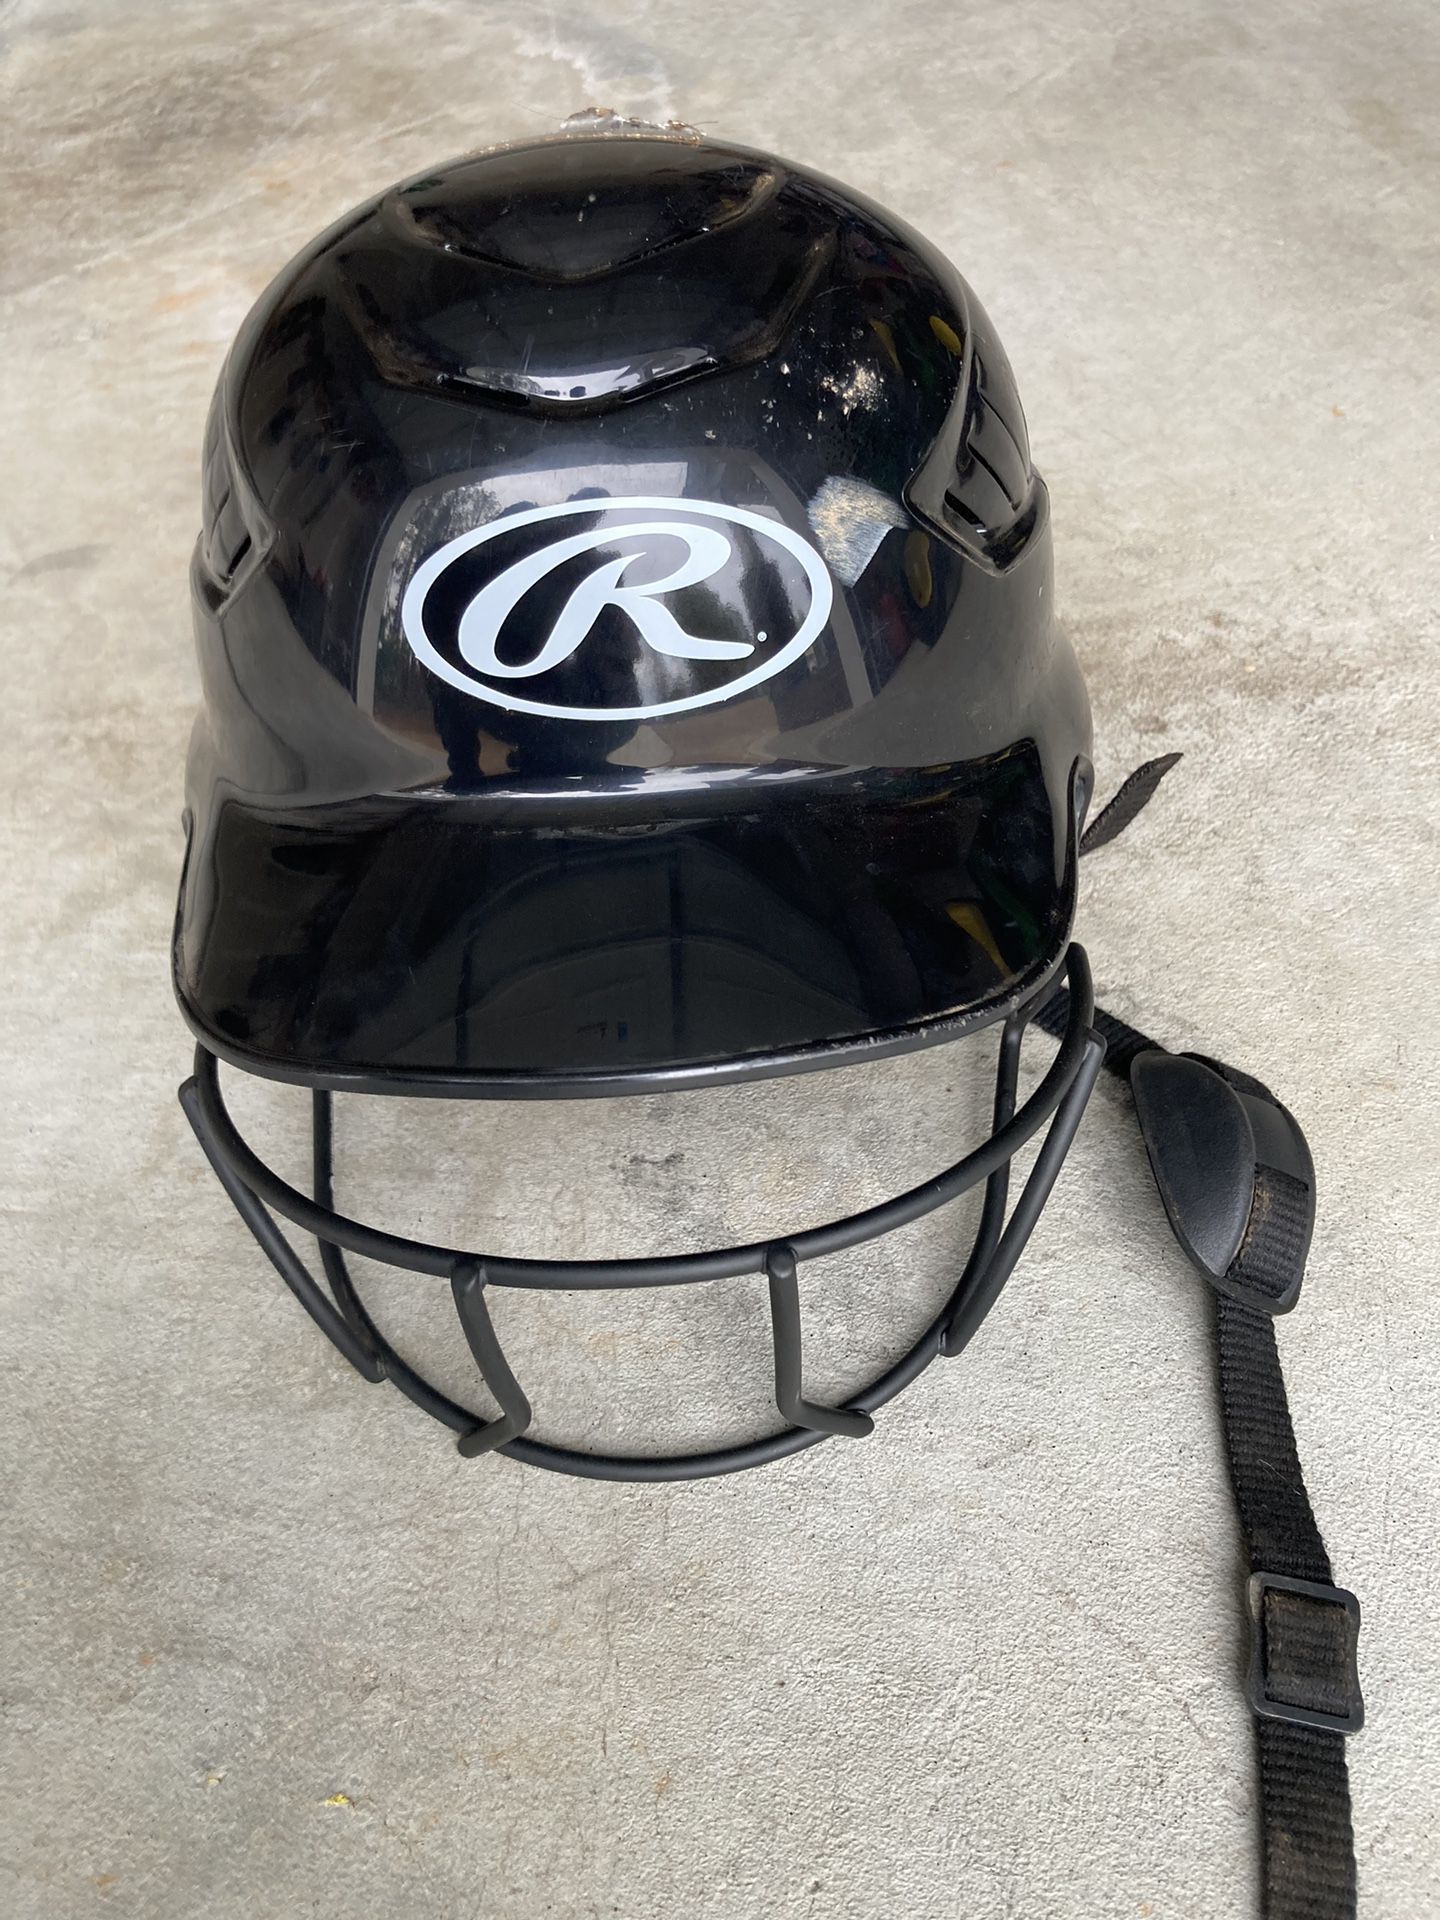 Rawlings Coolflo Youth Baseball/Softball Batting Helmet, with Face Guard and Chin Guard, Model CFTBH-R1, Black